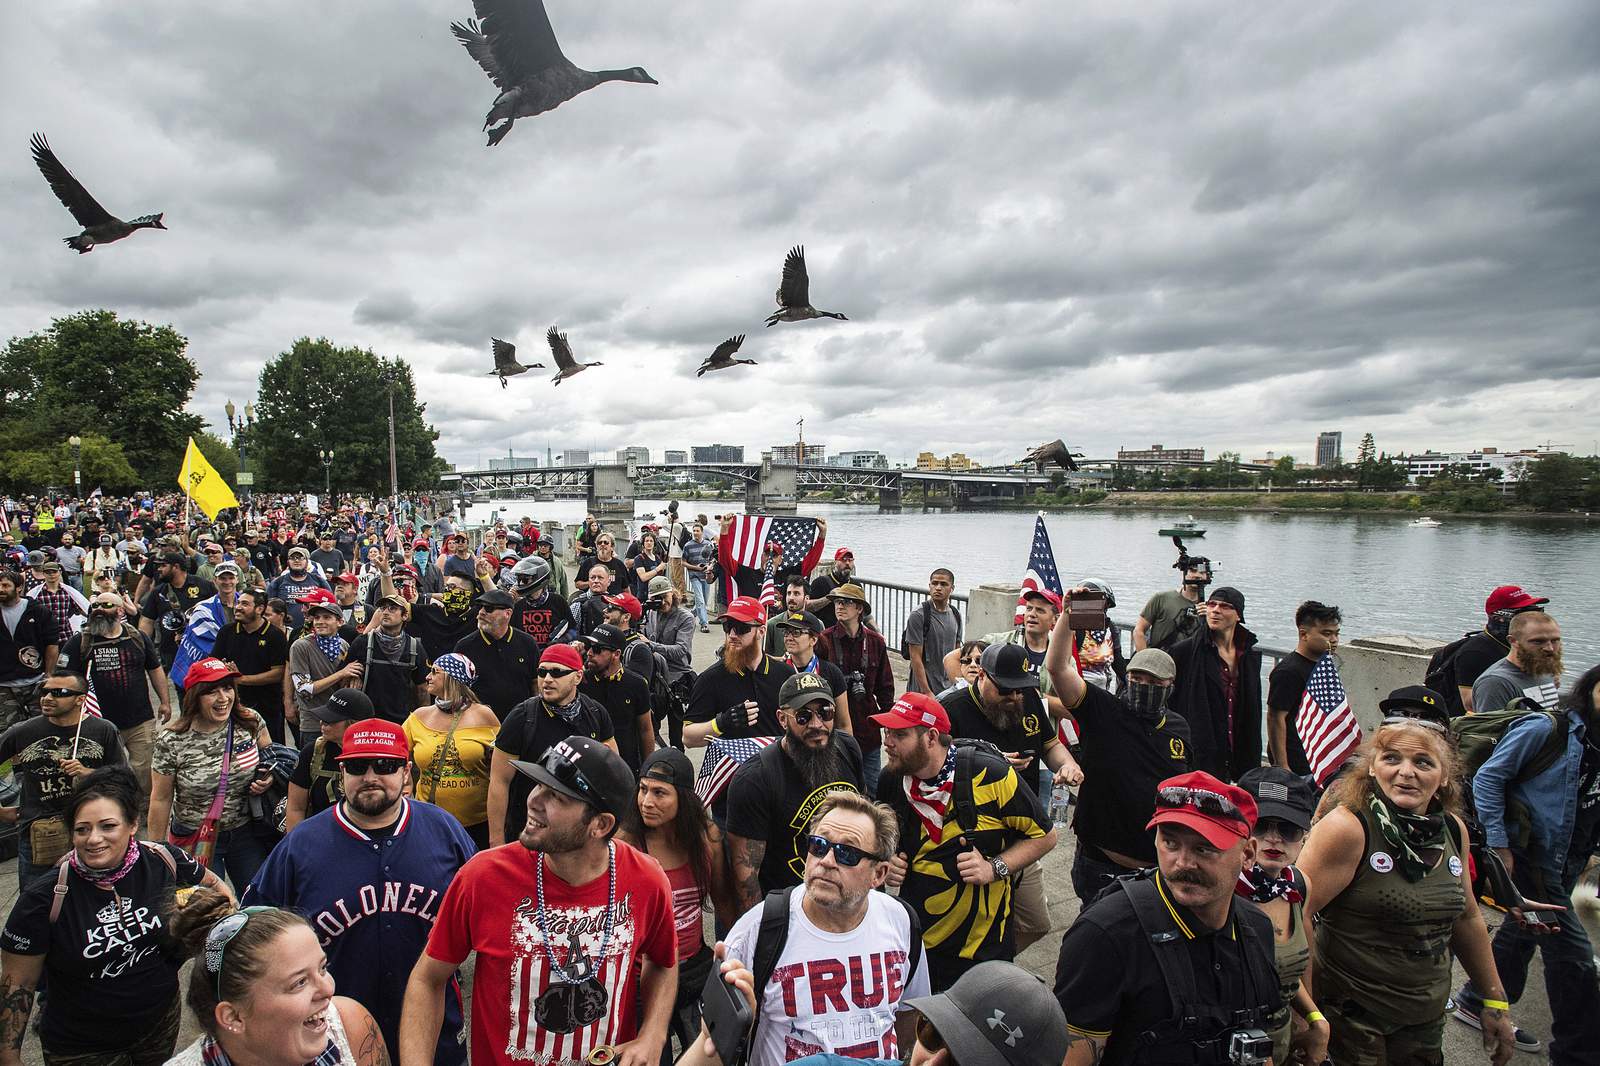 Portland denies permit for right-wing rally, cites COVID-19